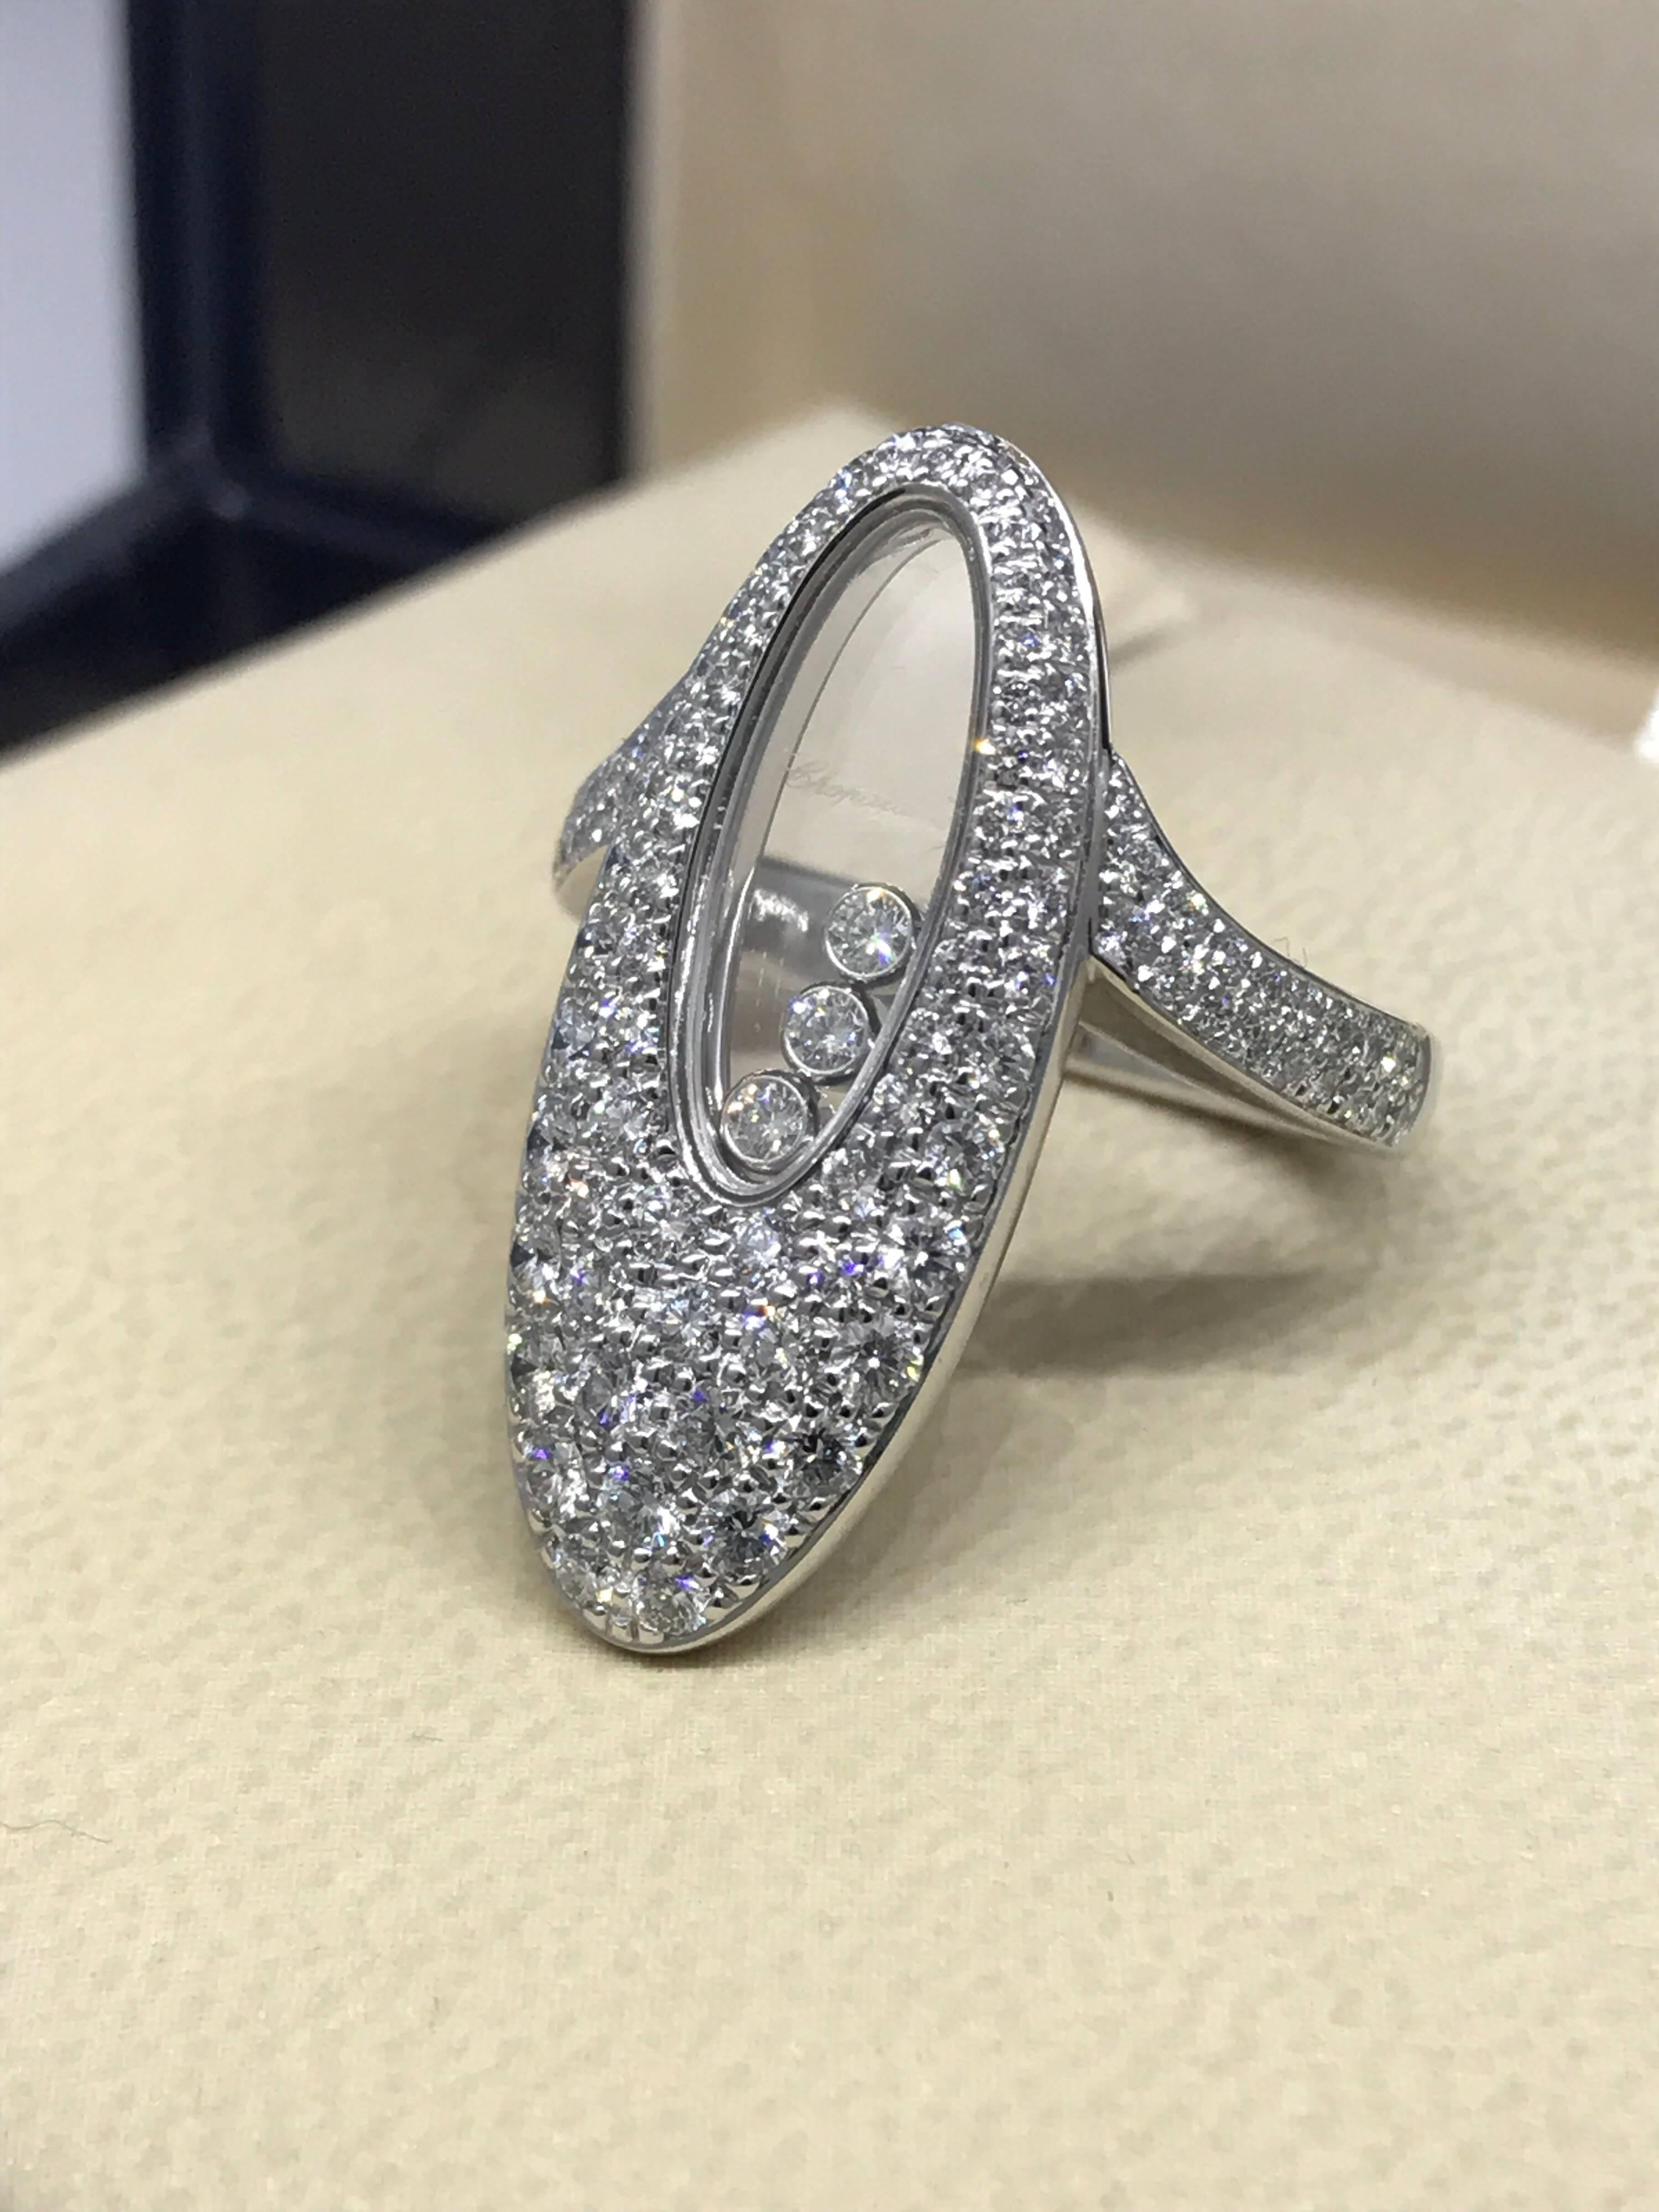 Chopard Happy Diamonds Oval Ring

Model Number: 82/7782-1210

100% Authentic

Brand New

Comes with original Chopard box, certificate of authenticity and warranty and jewels manual

18 Karat White Gold (12.10gr)

106 Diamonds on the Ring (1.20